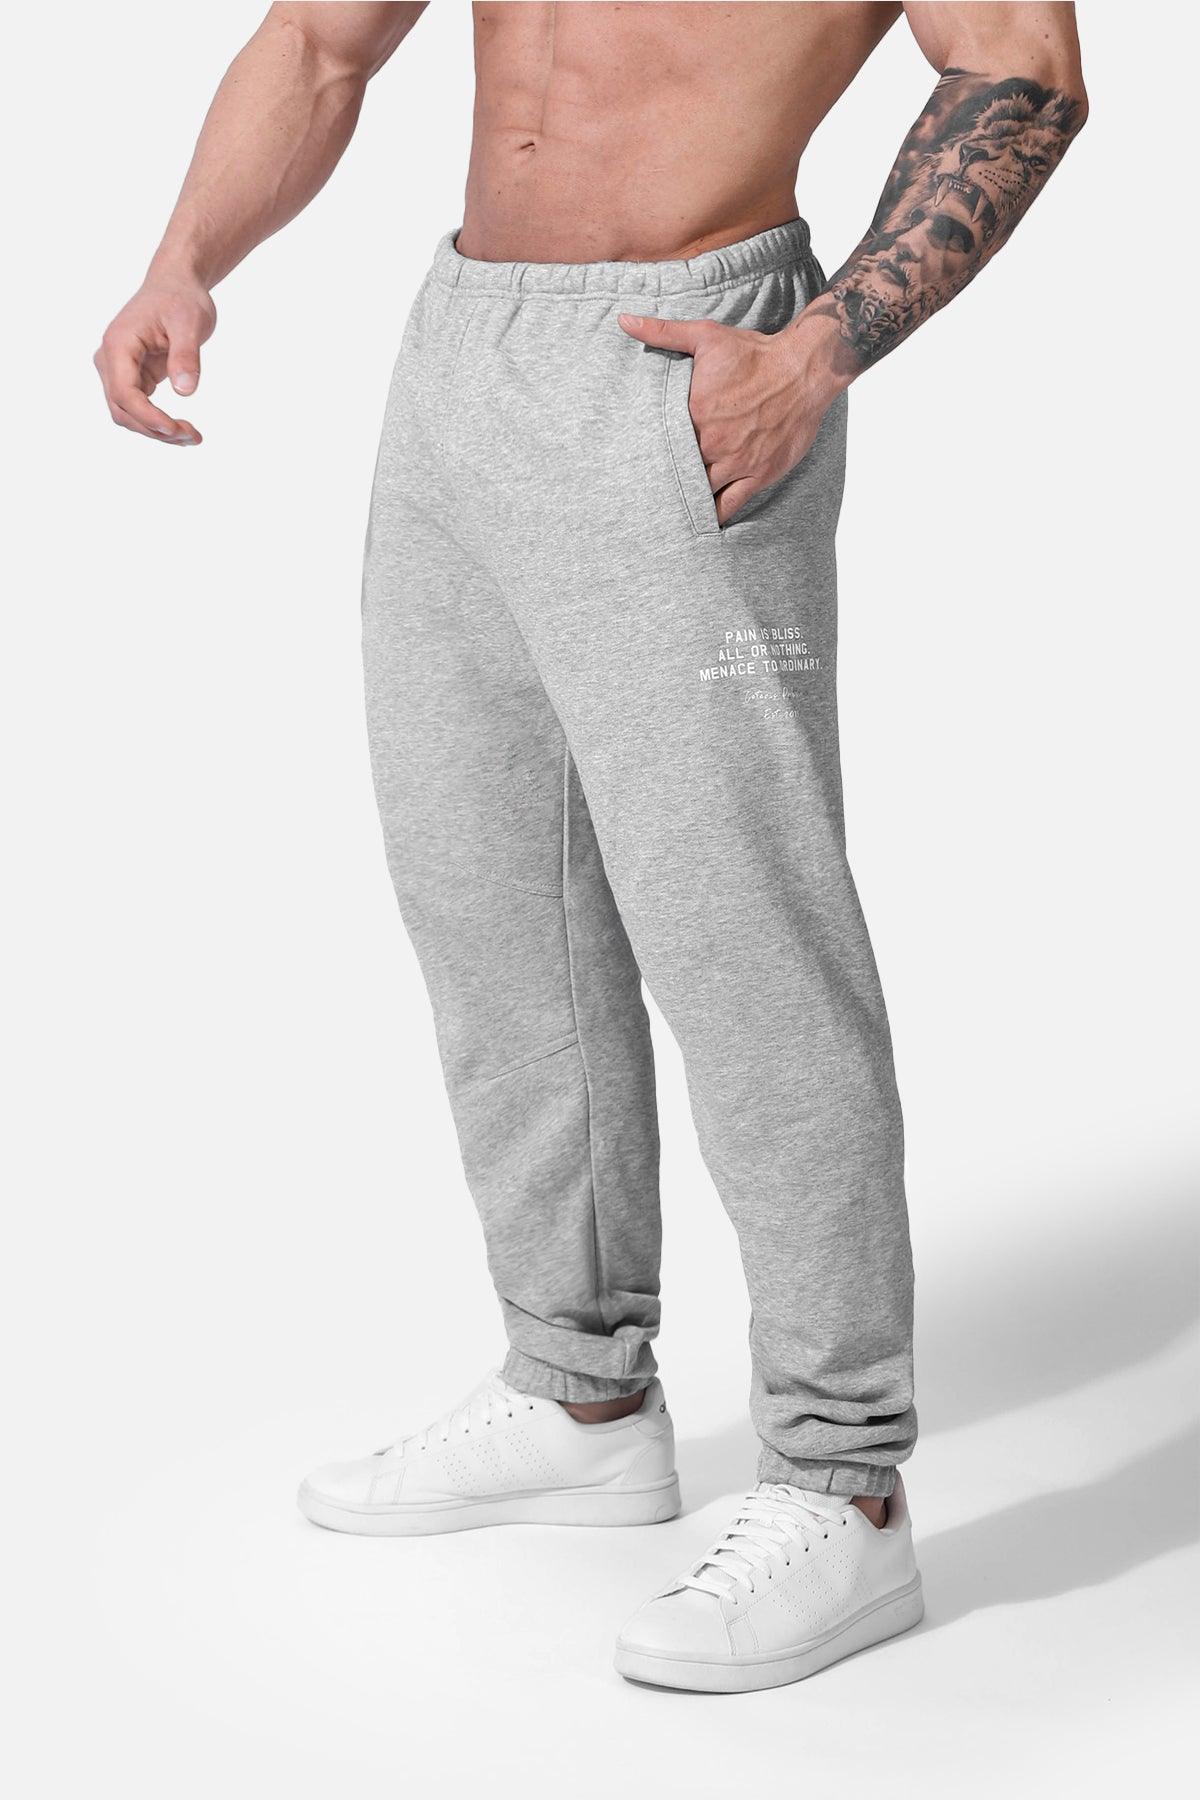 All Or Nothing French Terry Joggers - Light Gray - Jed North Canada